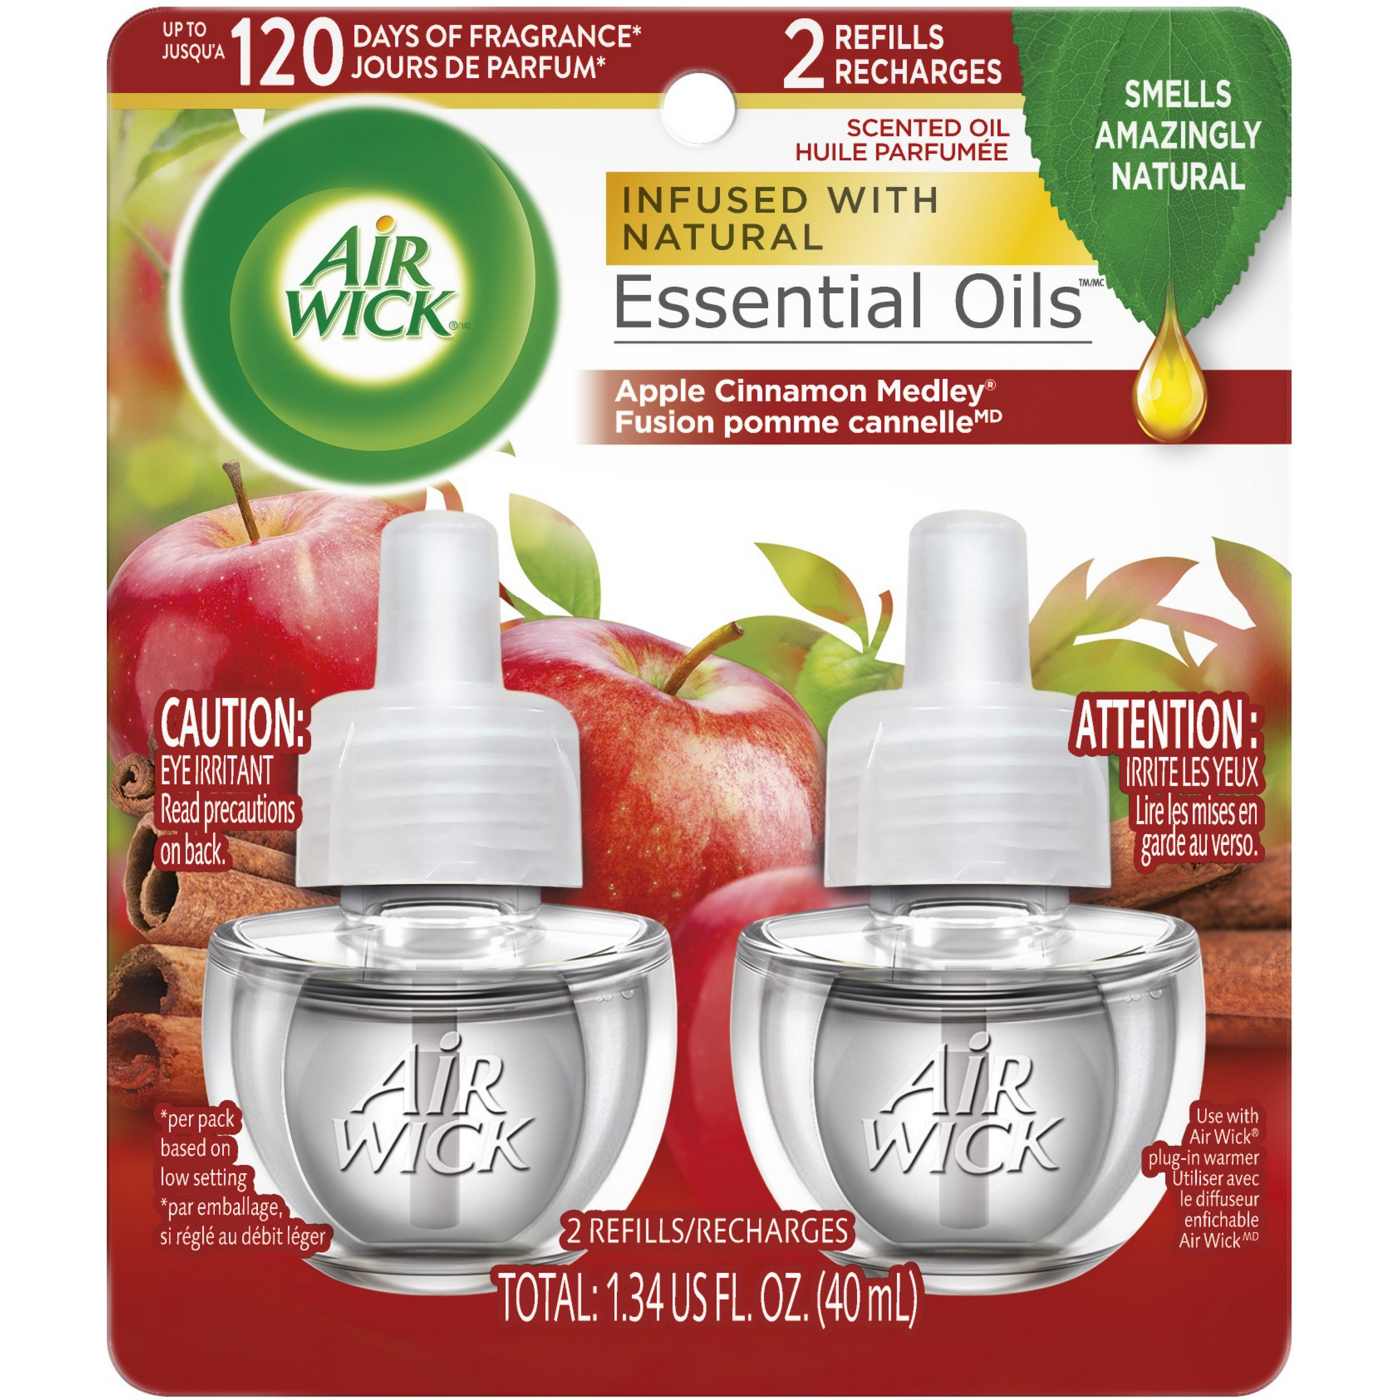 Air Wick Scented Oil Refills - Apple Cinnamon Medley; image 1 of 2